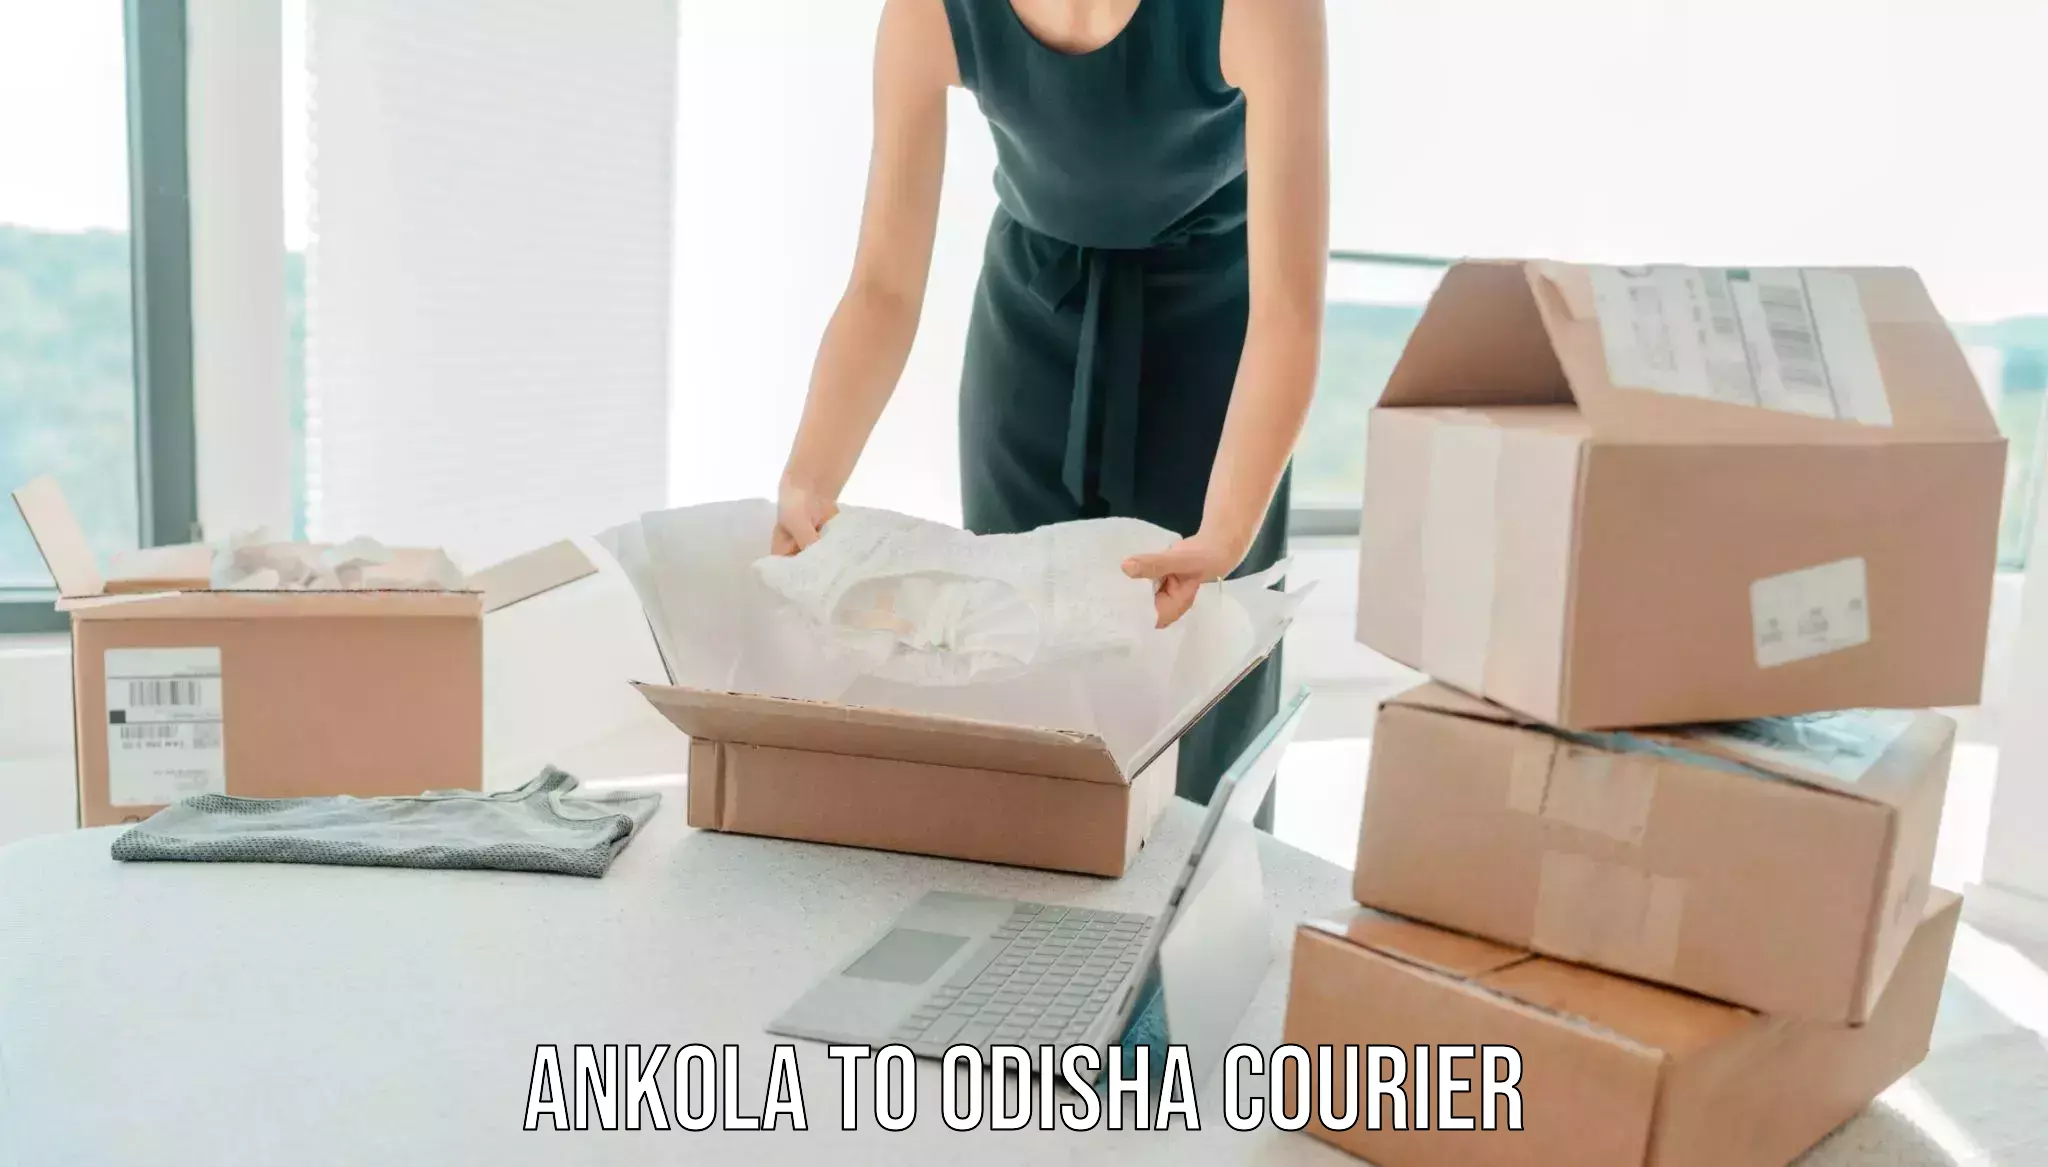 Trusted relocation services Ankola to Asika